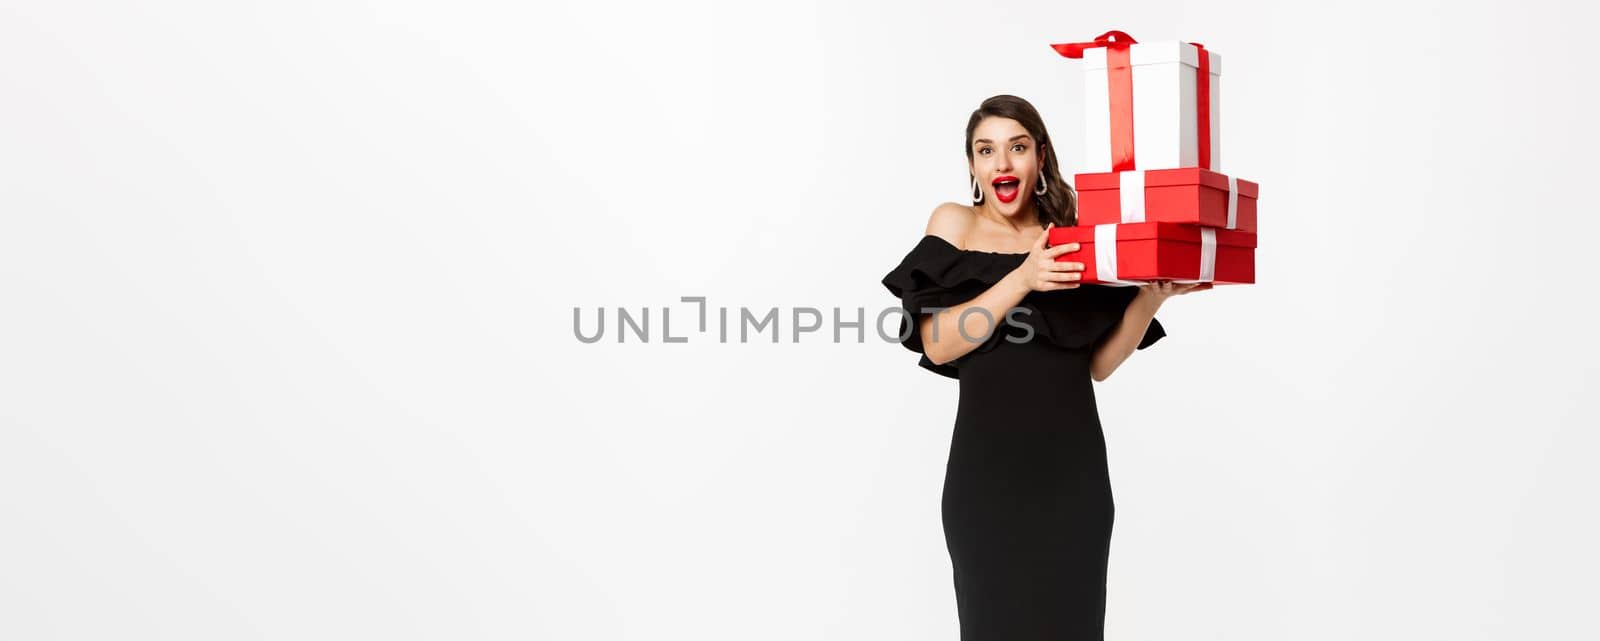 Merry christmas and new year holidays concept. Cheerful lady in black dress holding xmas presents and smiling at camera, standing over white background.